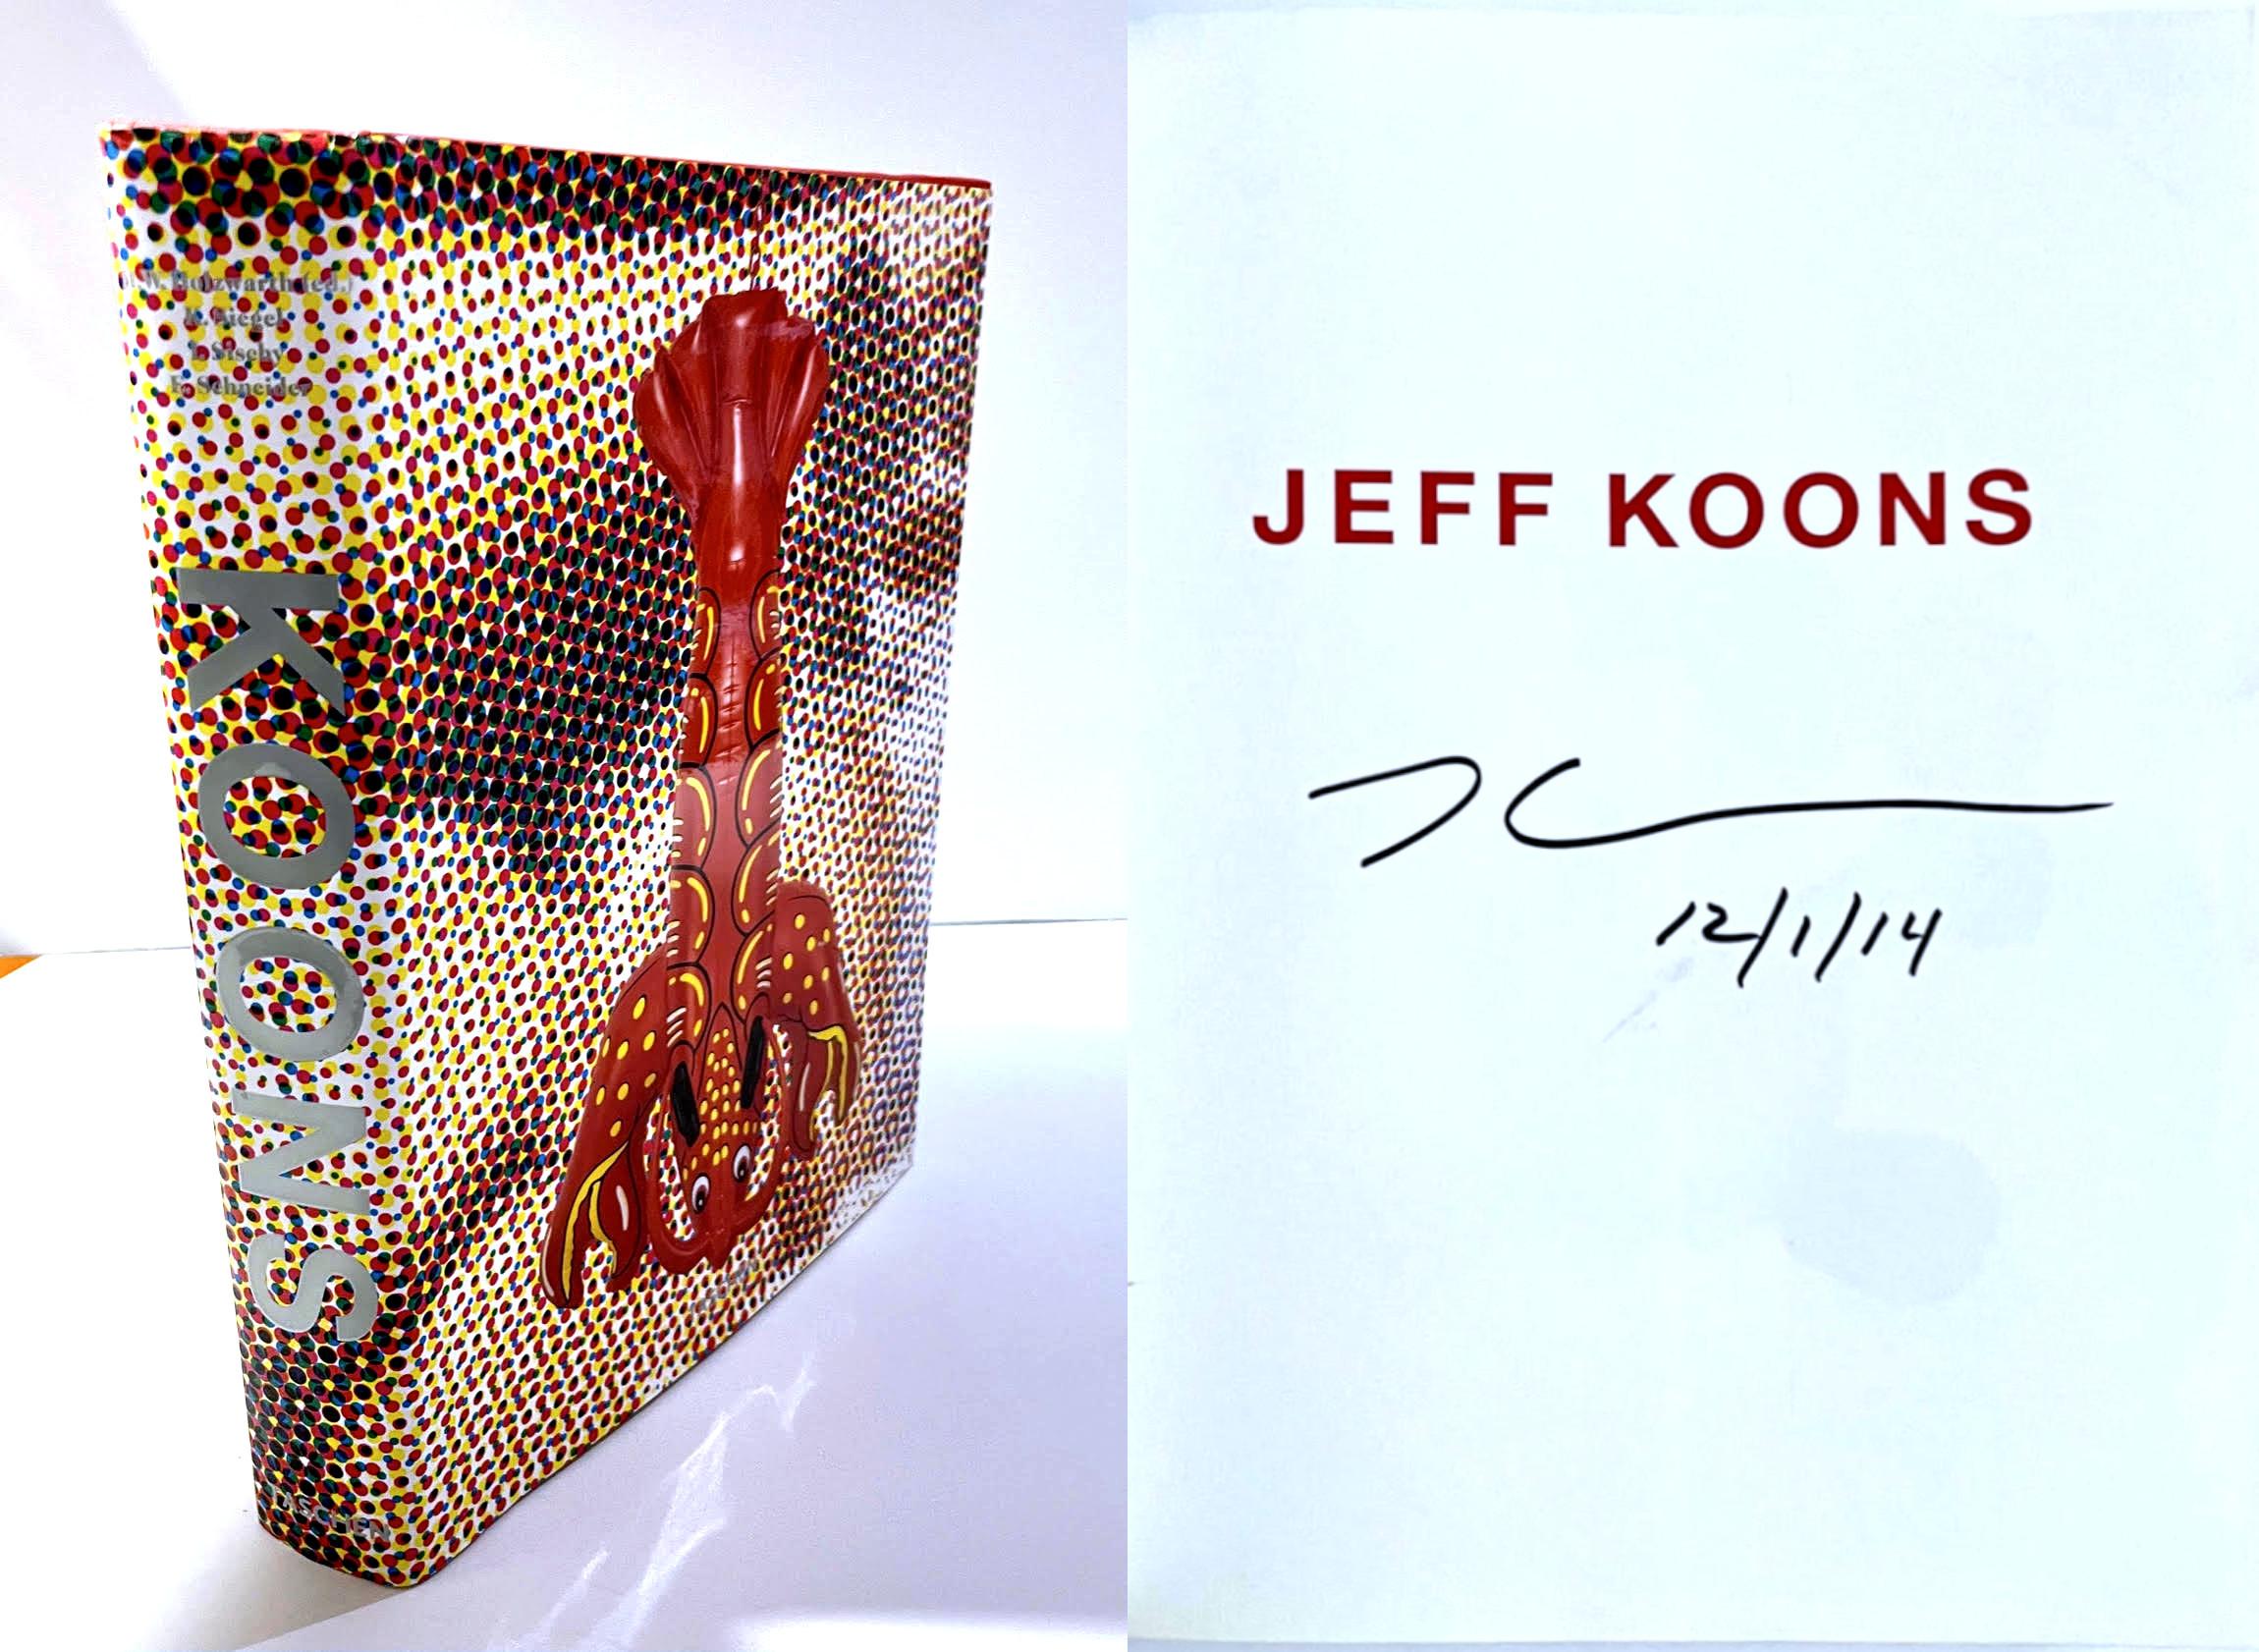 Lavishly illustrated 592 page monograph (hand signed by Jeff Koons)